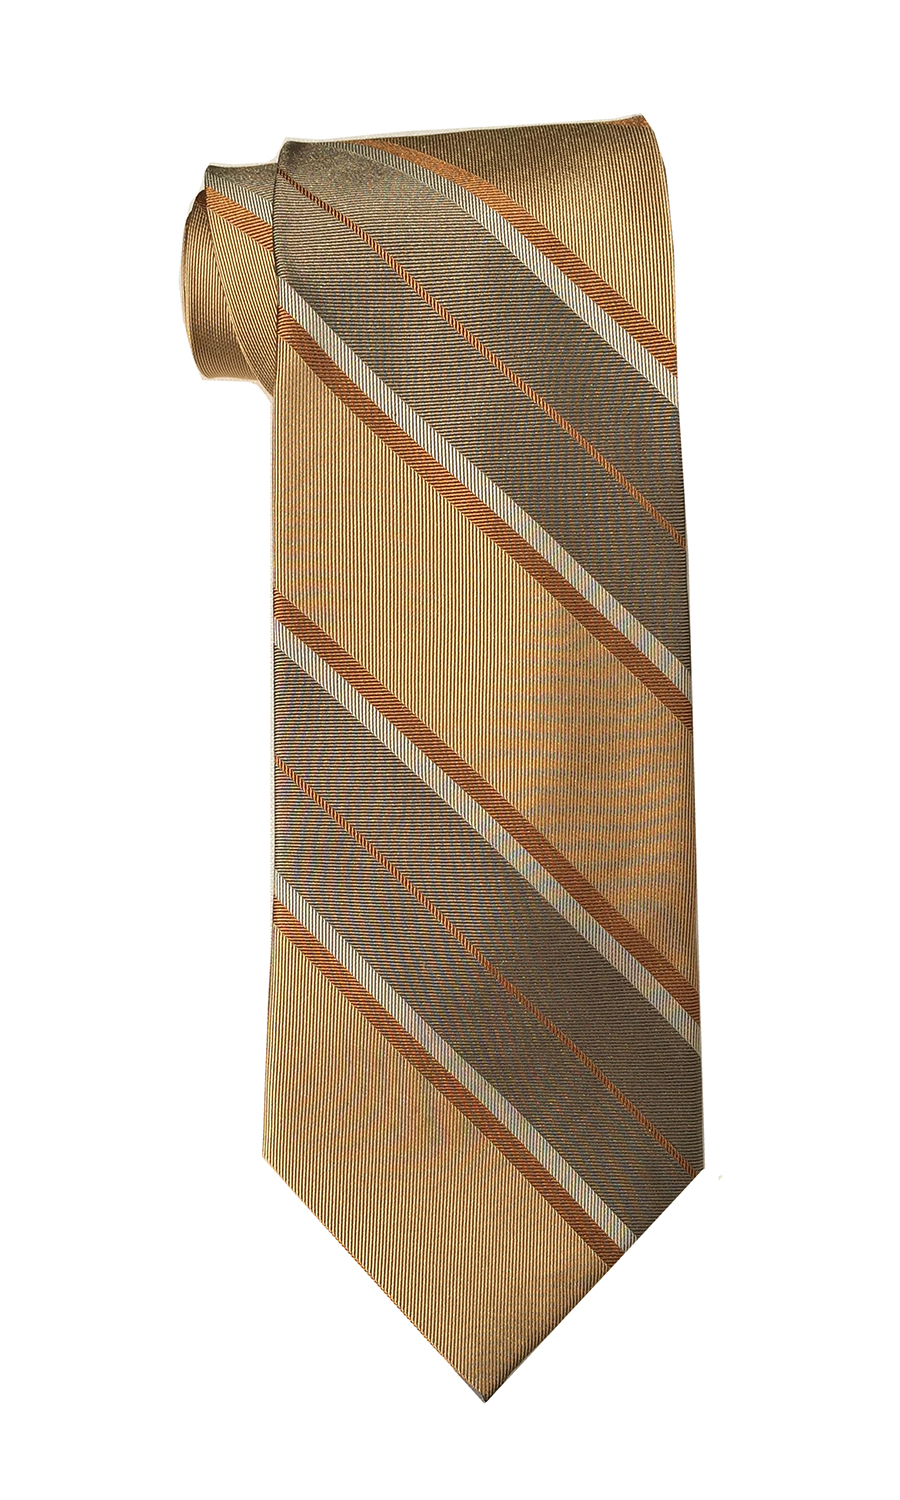 Oscar Lima tie in pheasant and umber